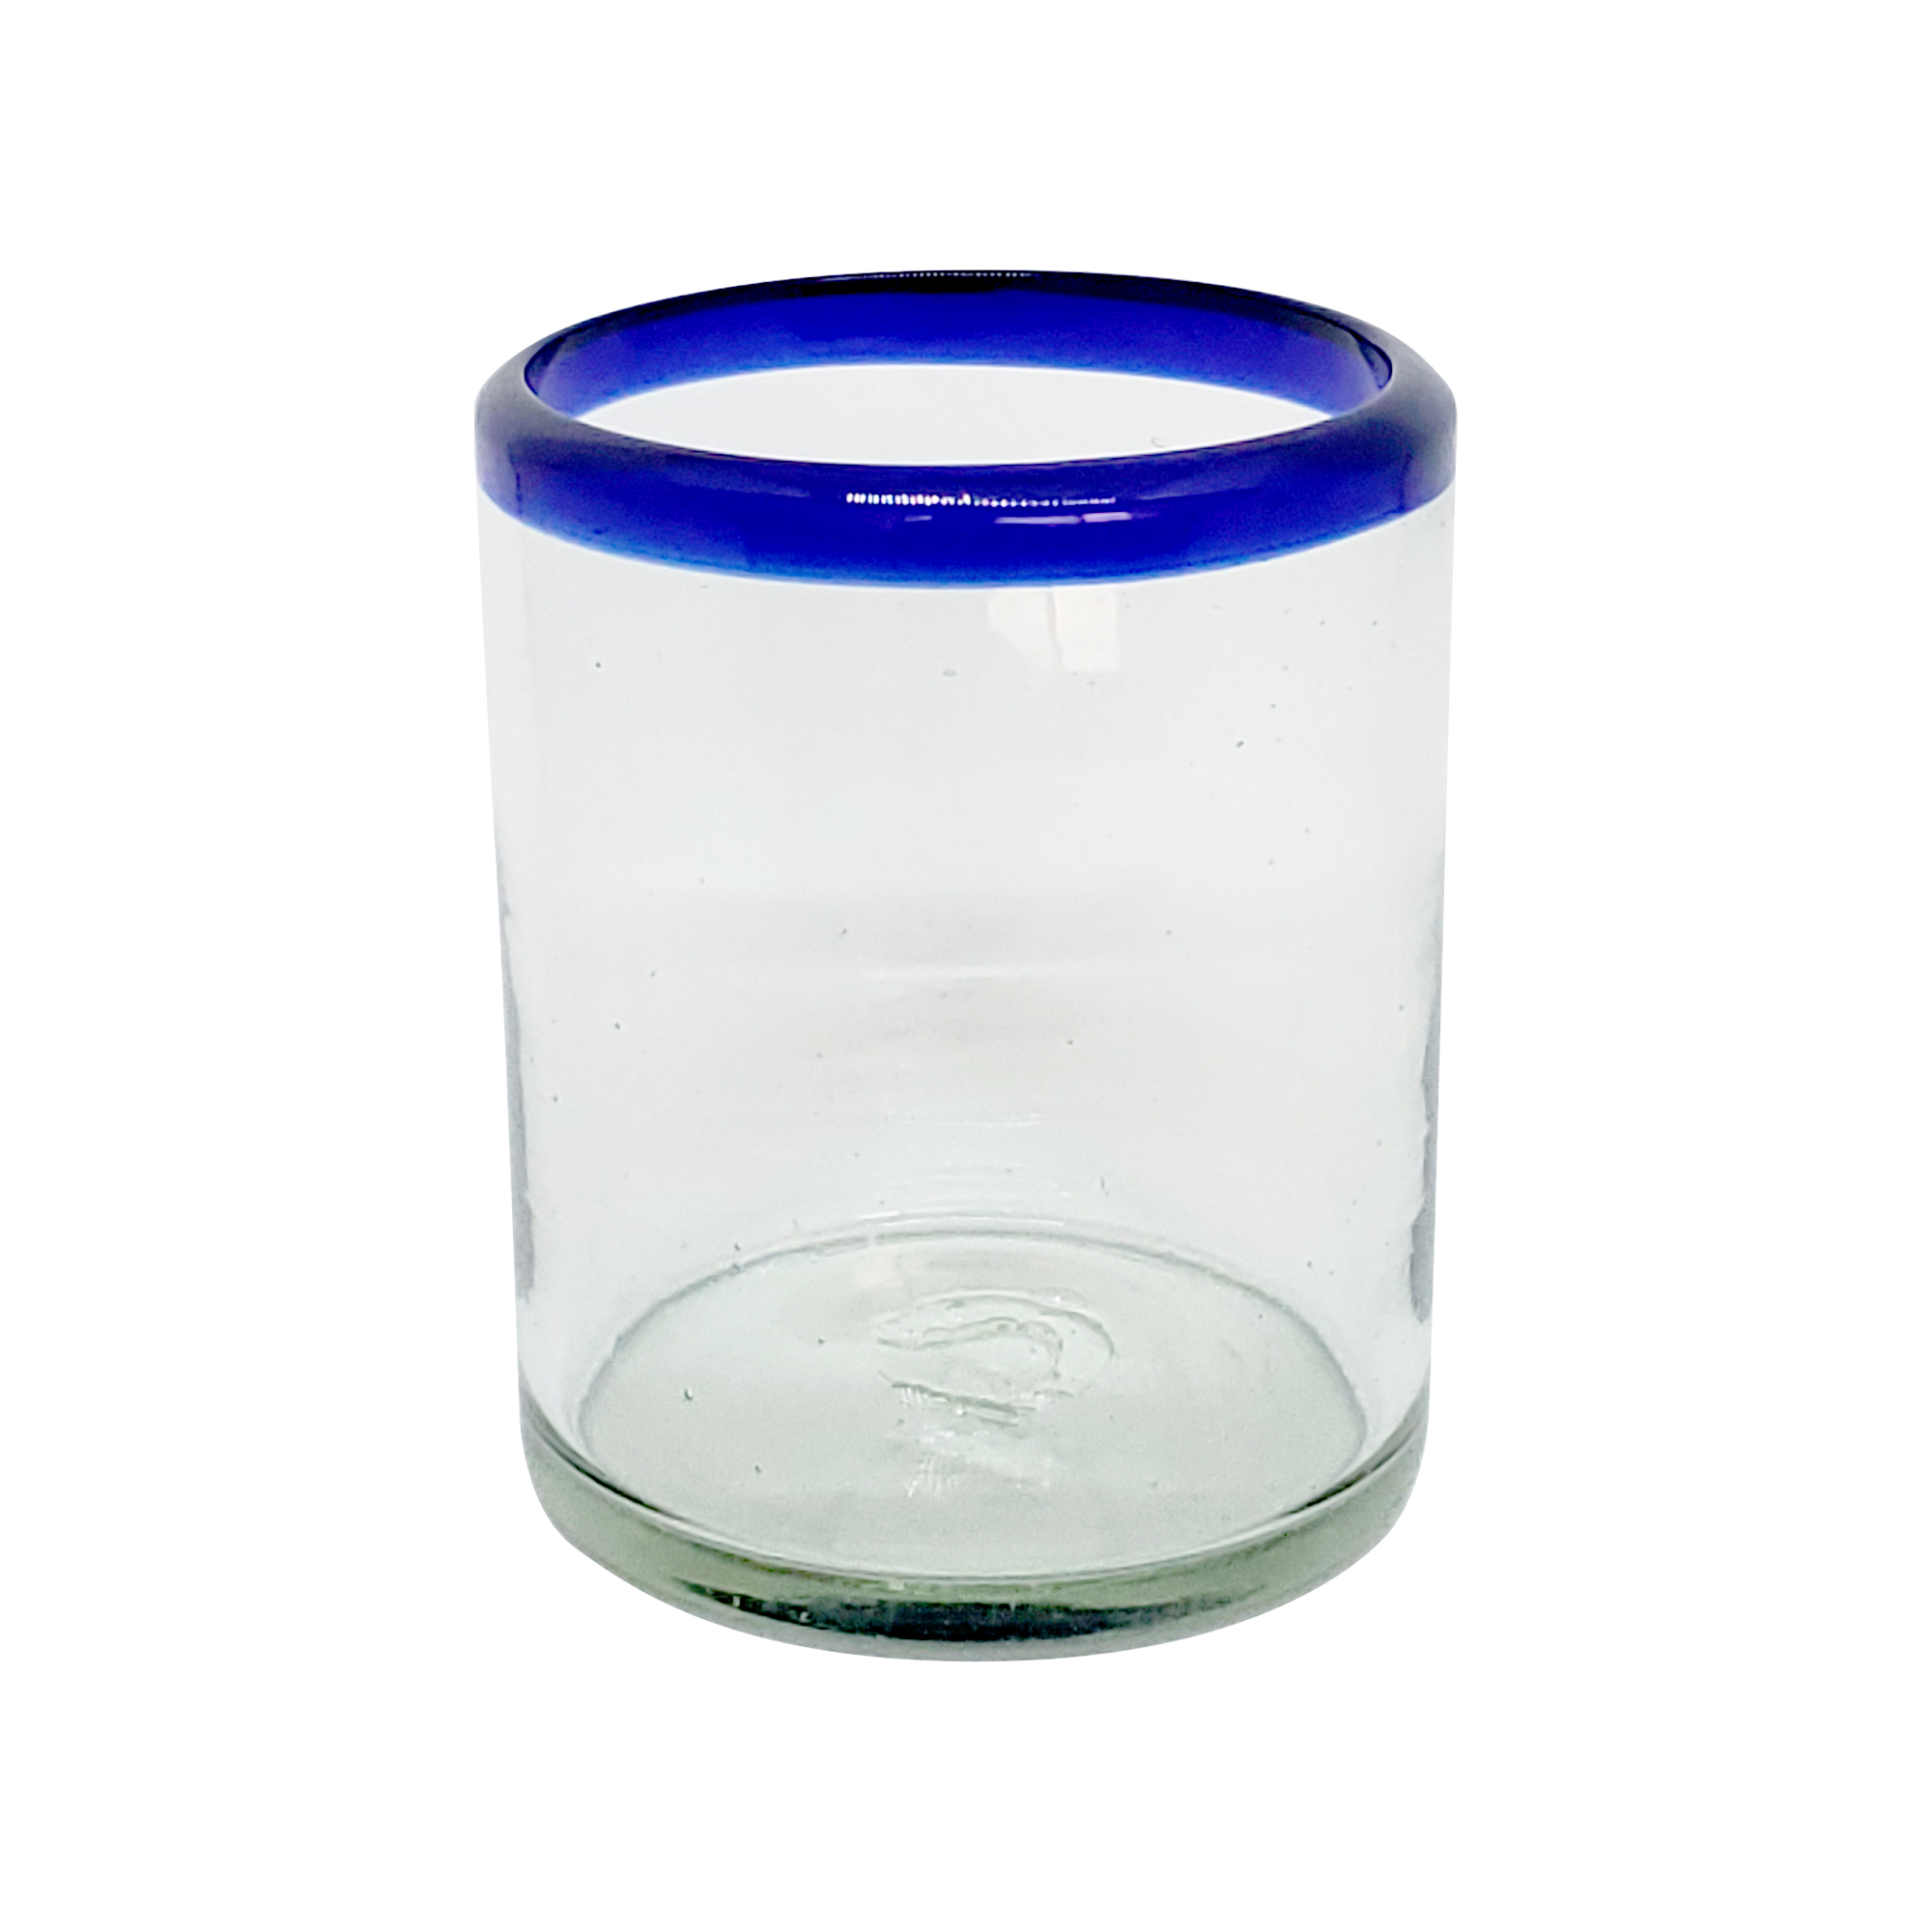 Mexican Glasses / Cobalt Blue Rim 10 oz Tumblers (set of 6) / This festive set of tumblers is great for a glass of milk with cookies or a lemonade on a hot summer day.